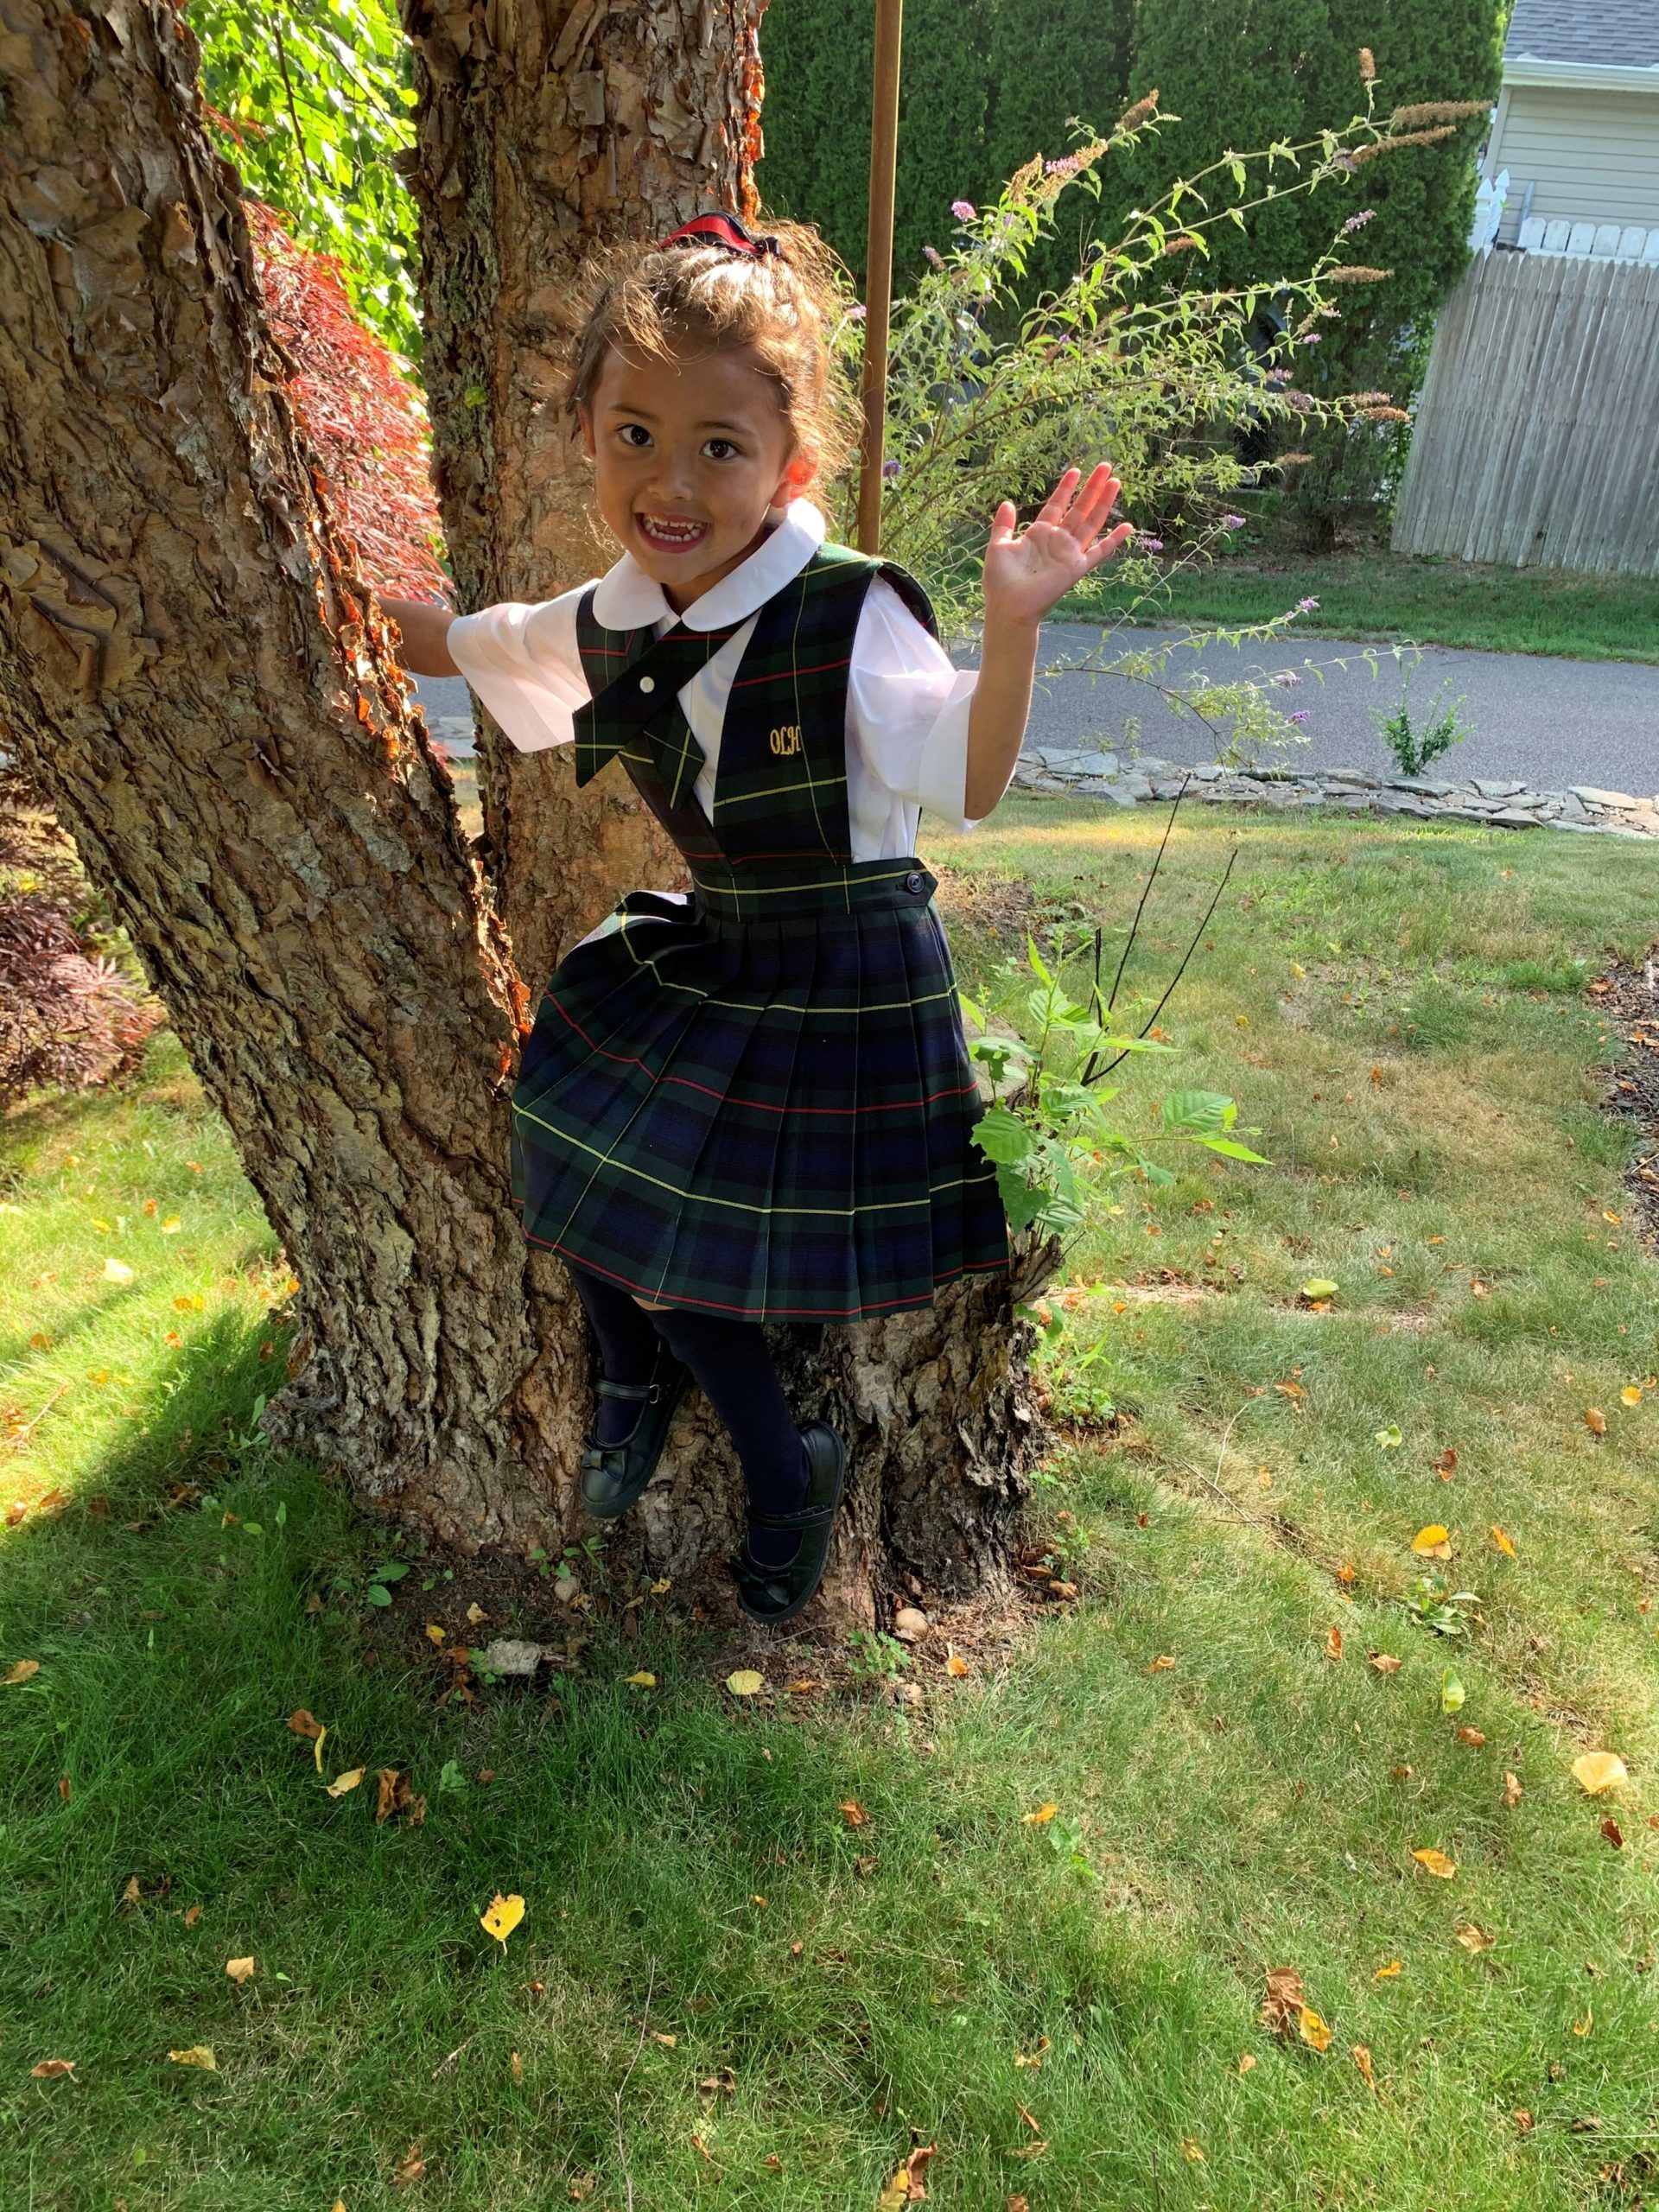 New kindergartner Myla Turnbull tried on her new OLH uniform for the first time.